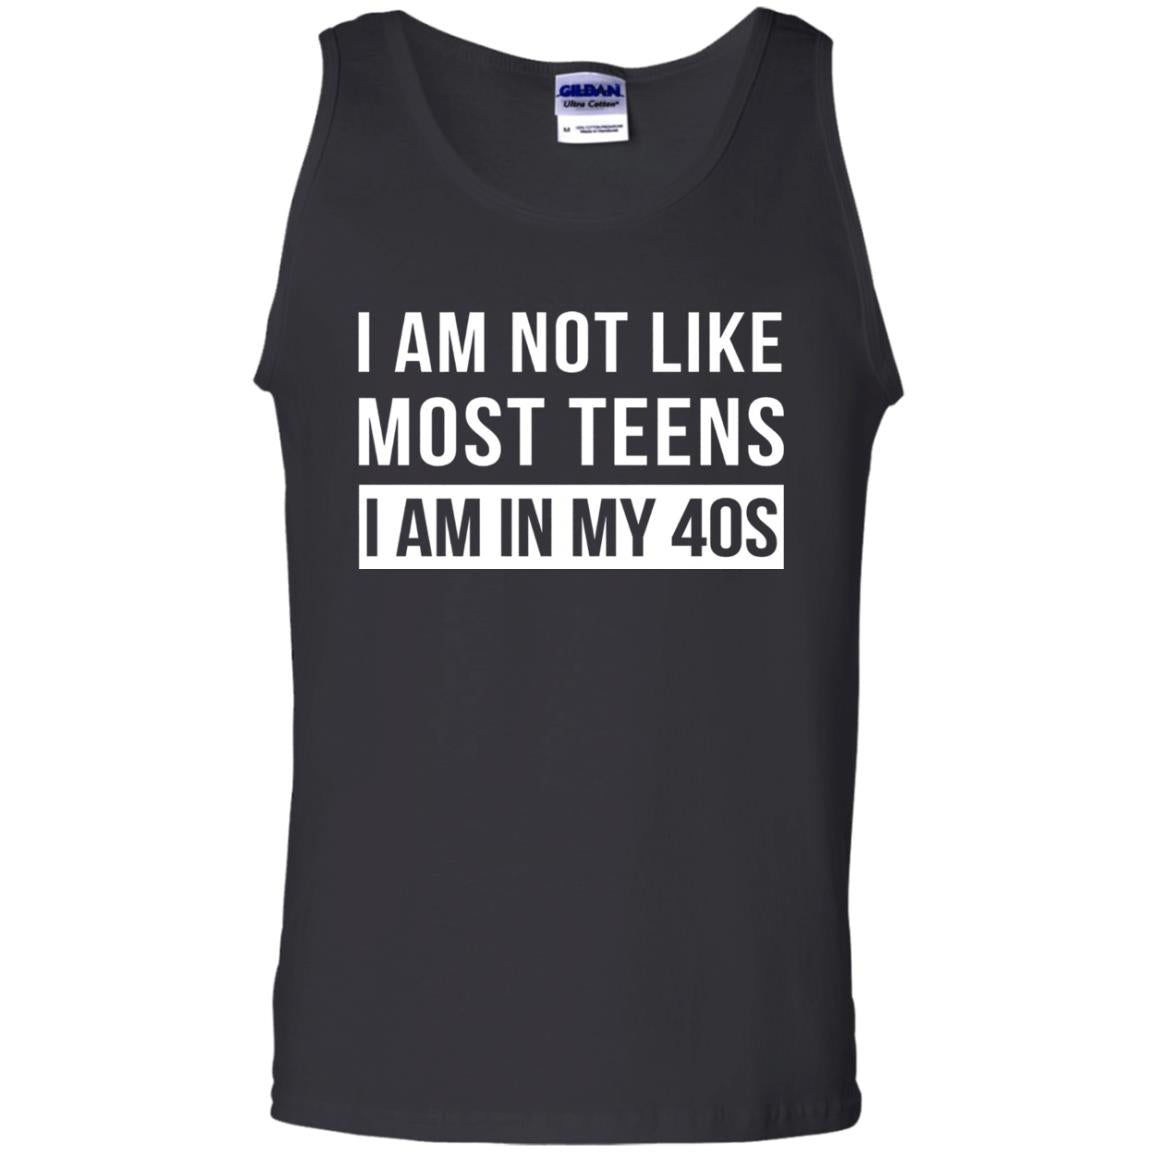 I Am Not Like Most Teens I Am In My 40s Shirt